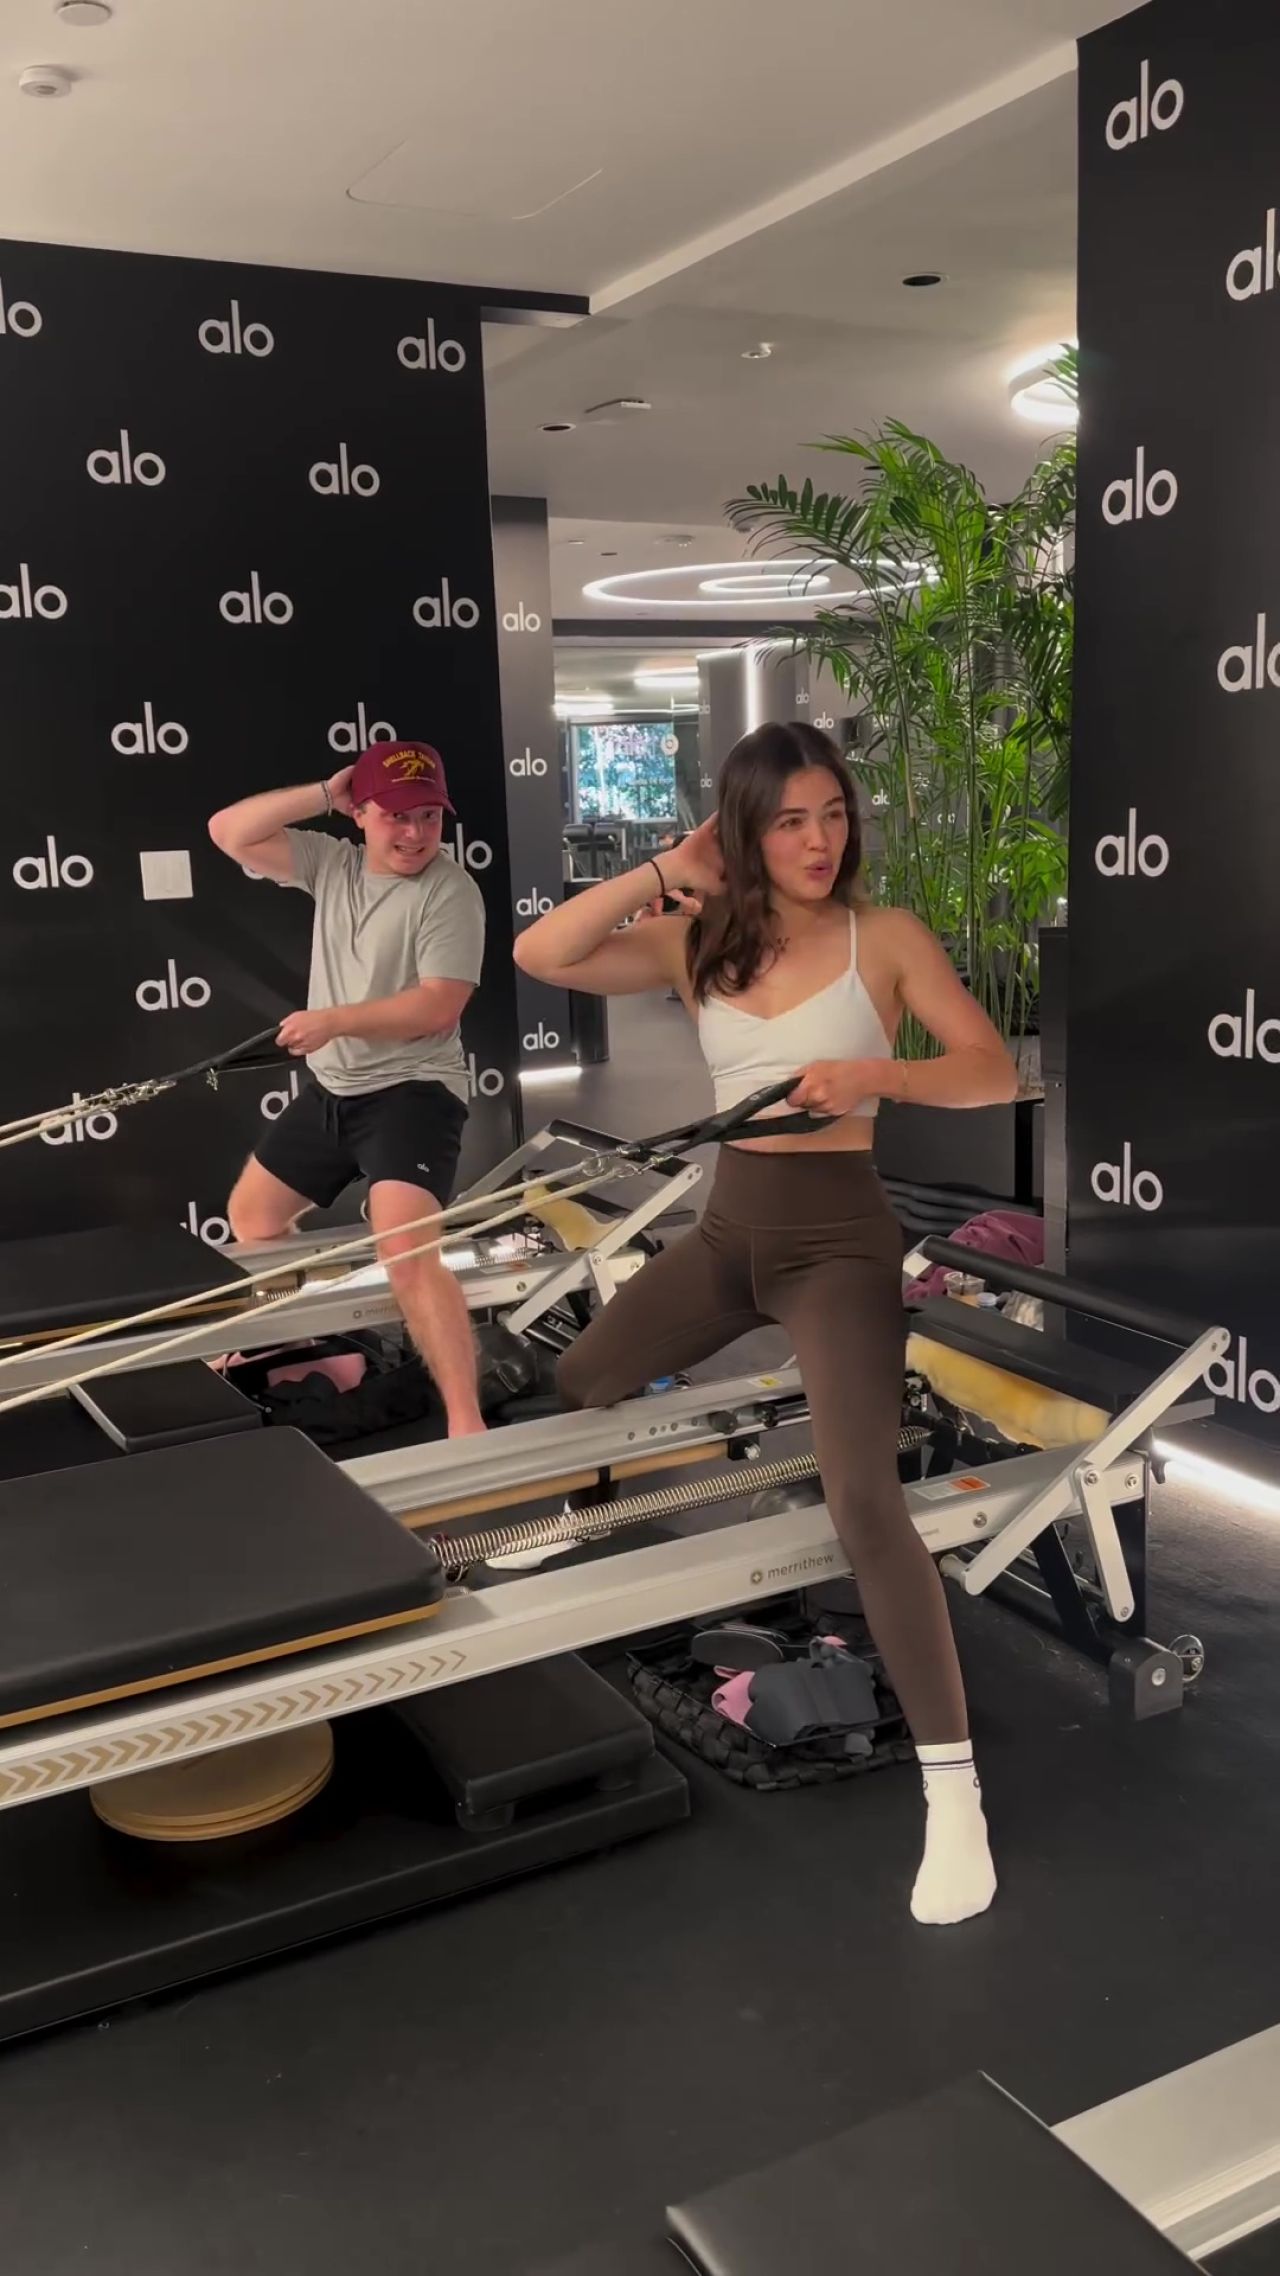 AMERICAN ACTRESS LUCY HALE WORKING OUT GYM STILLS10